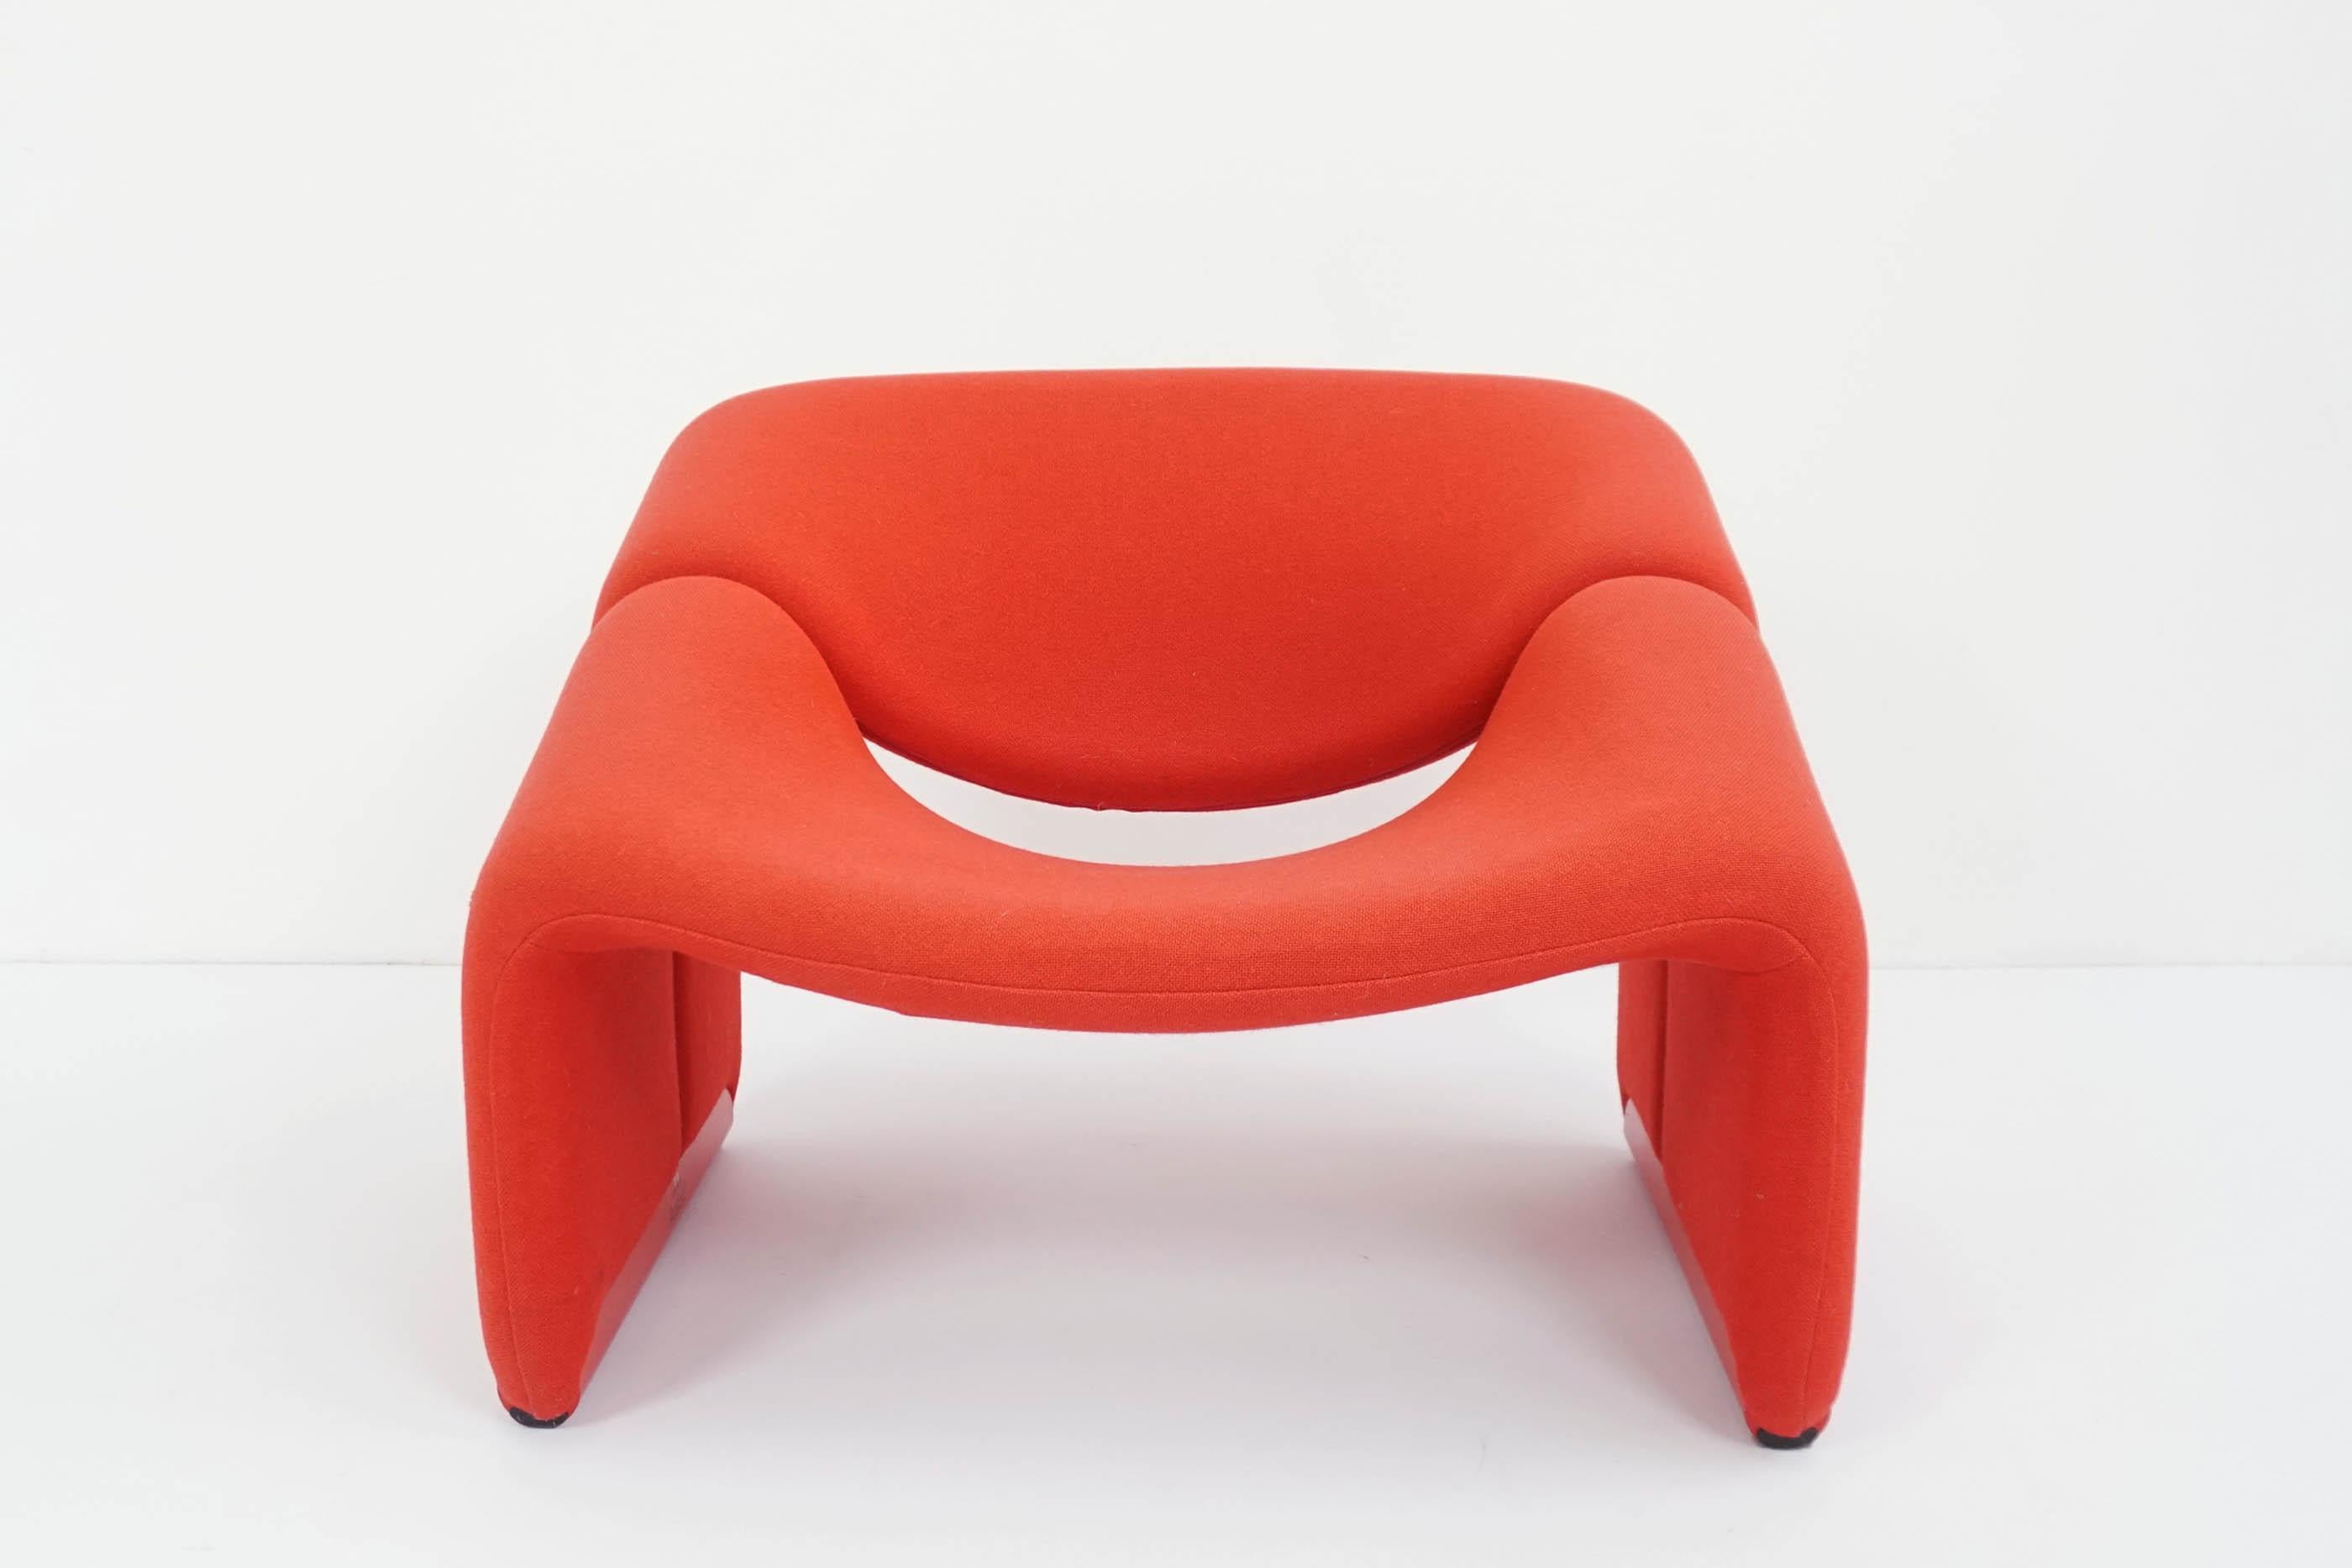 Iconic lounge chair designed by Pierre Paulin, 1973 and produced by Artifort
Original beautiful power red fabric cover.